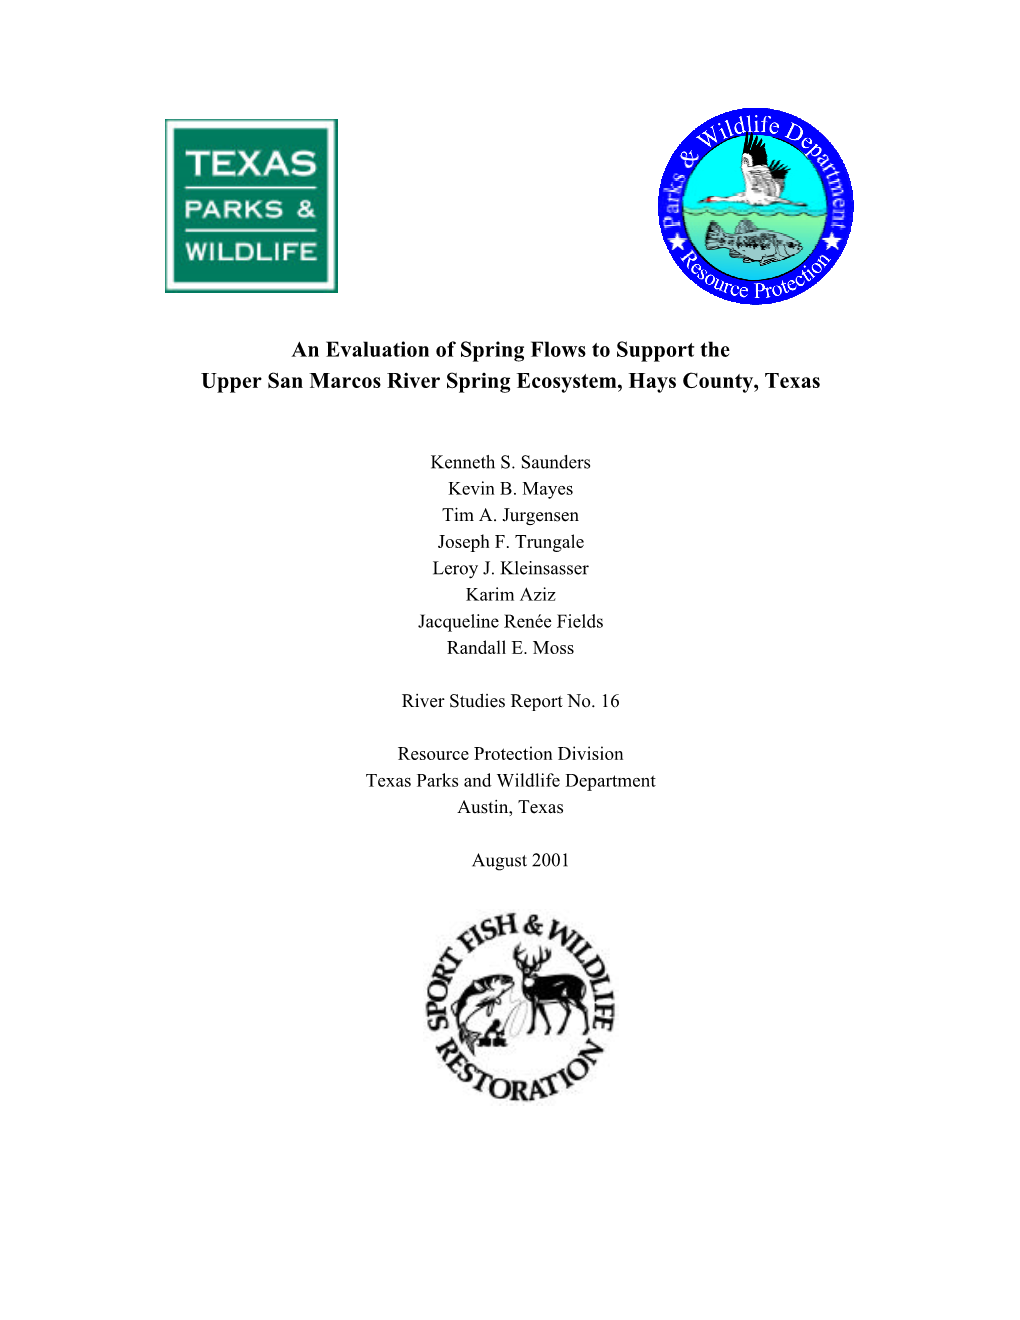 An Evaluation of Spring Flows to Support the Upper San Marcos River Spring Ecosystem, Hays County, Texas